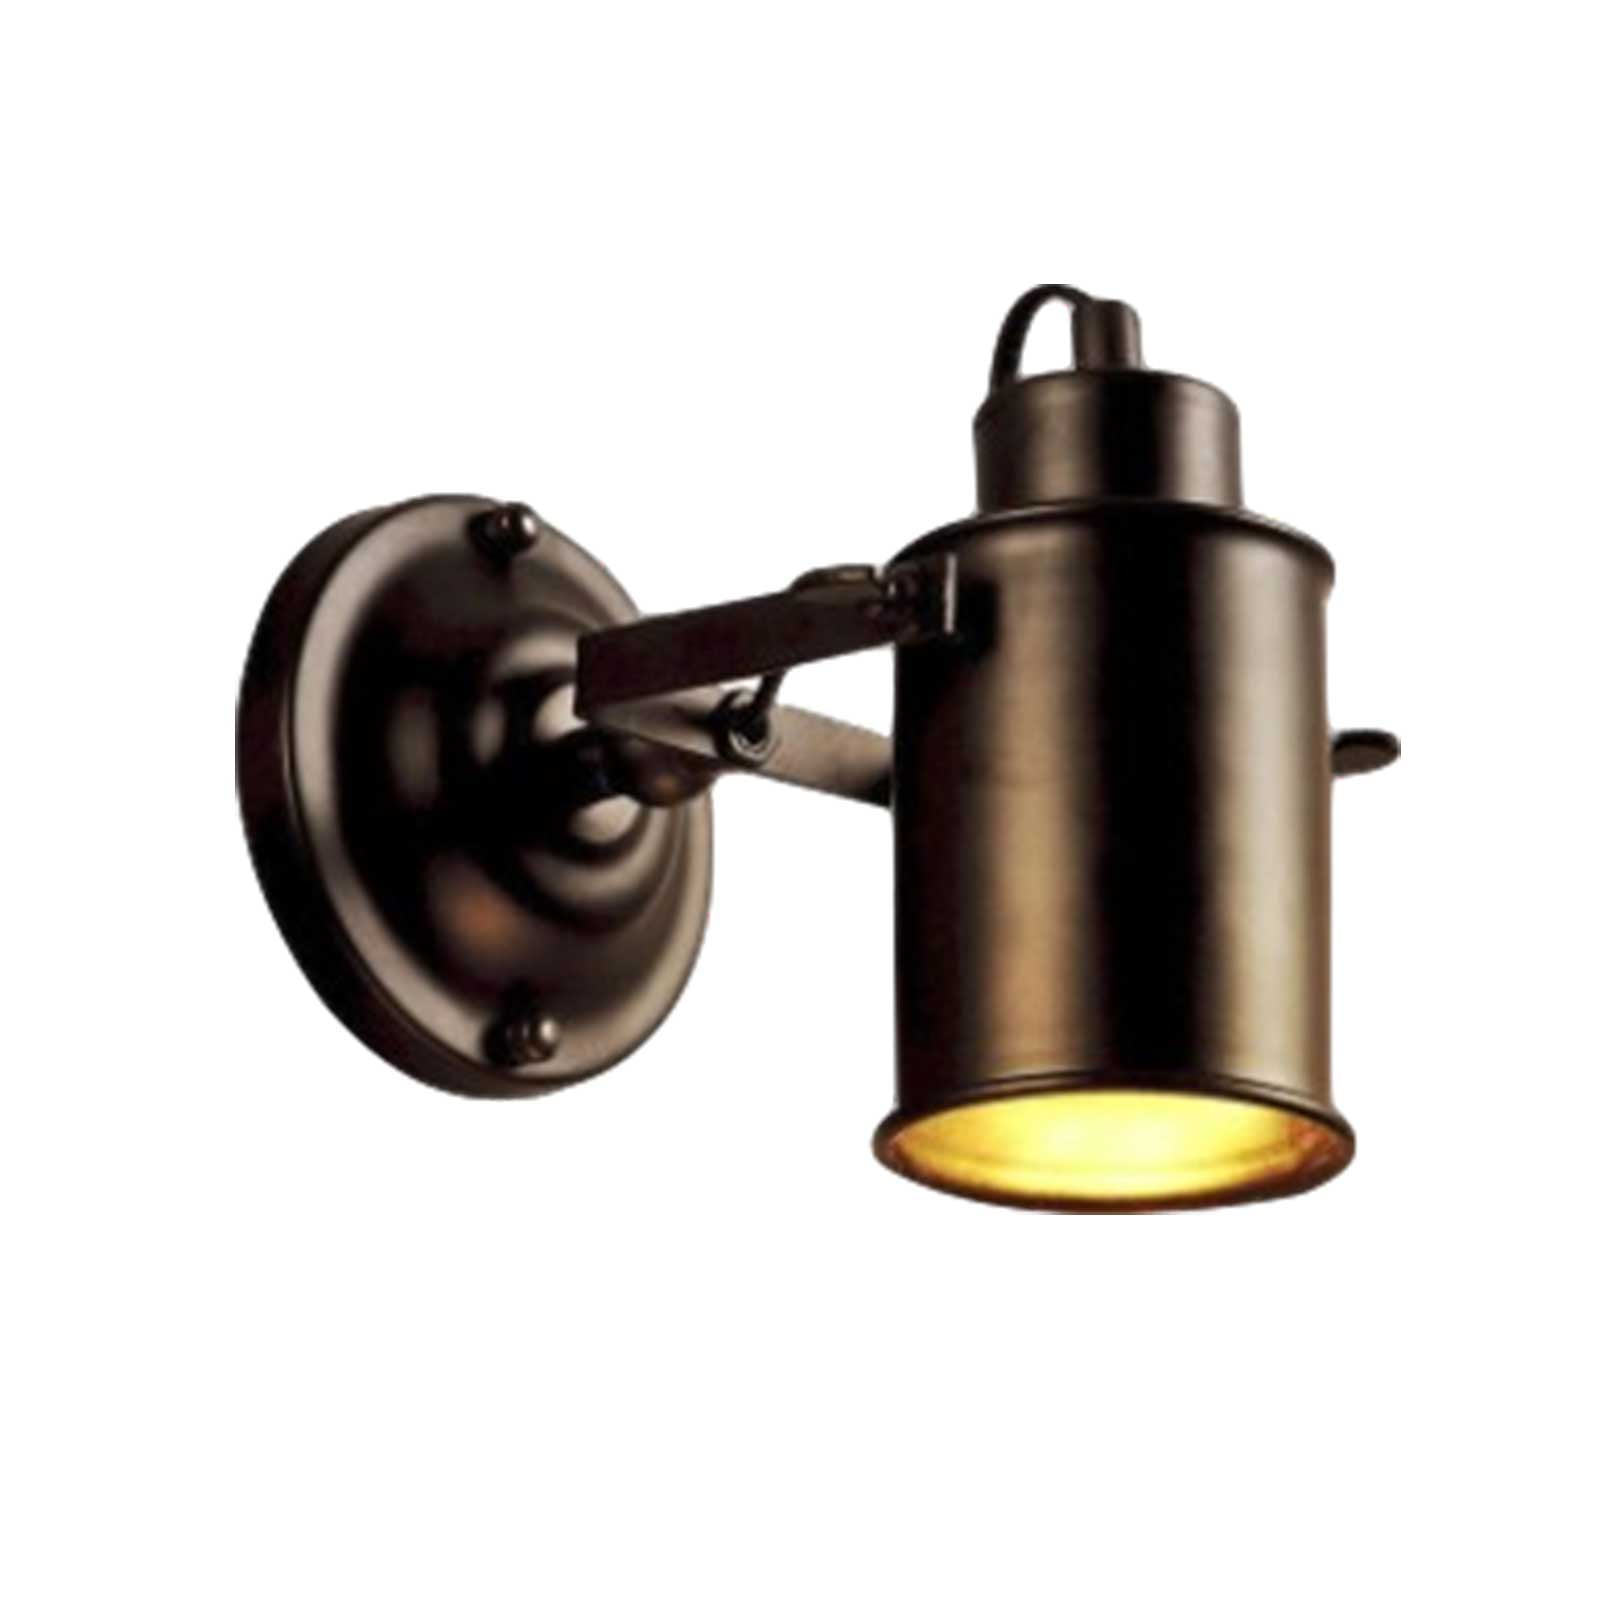 LATHAM Wall Light Lamp Industrial Style 5 way Vintage Retro CE MARKED 